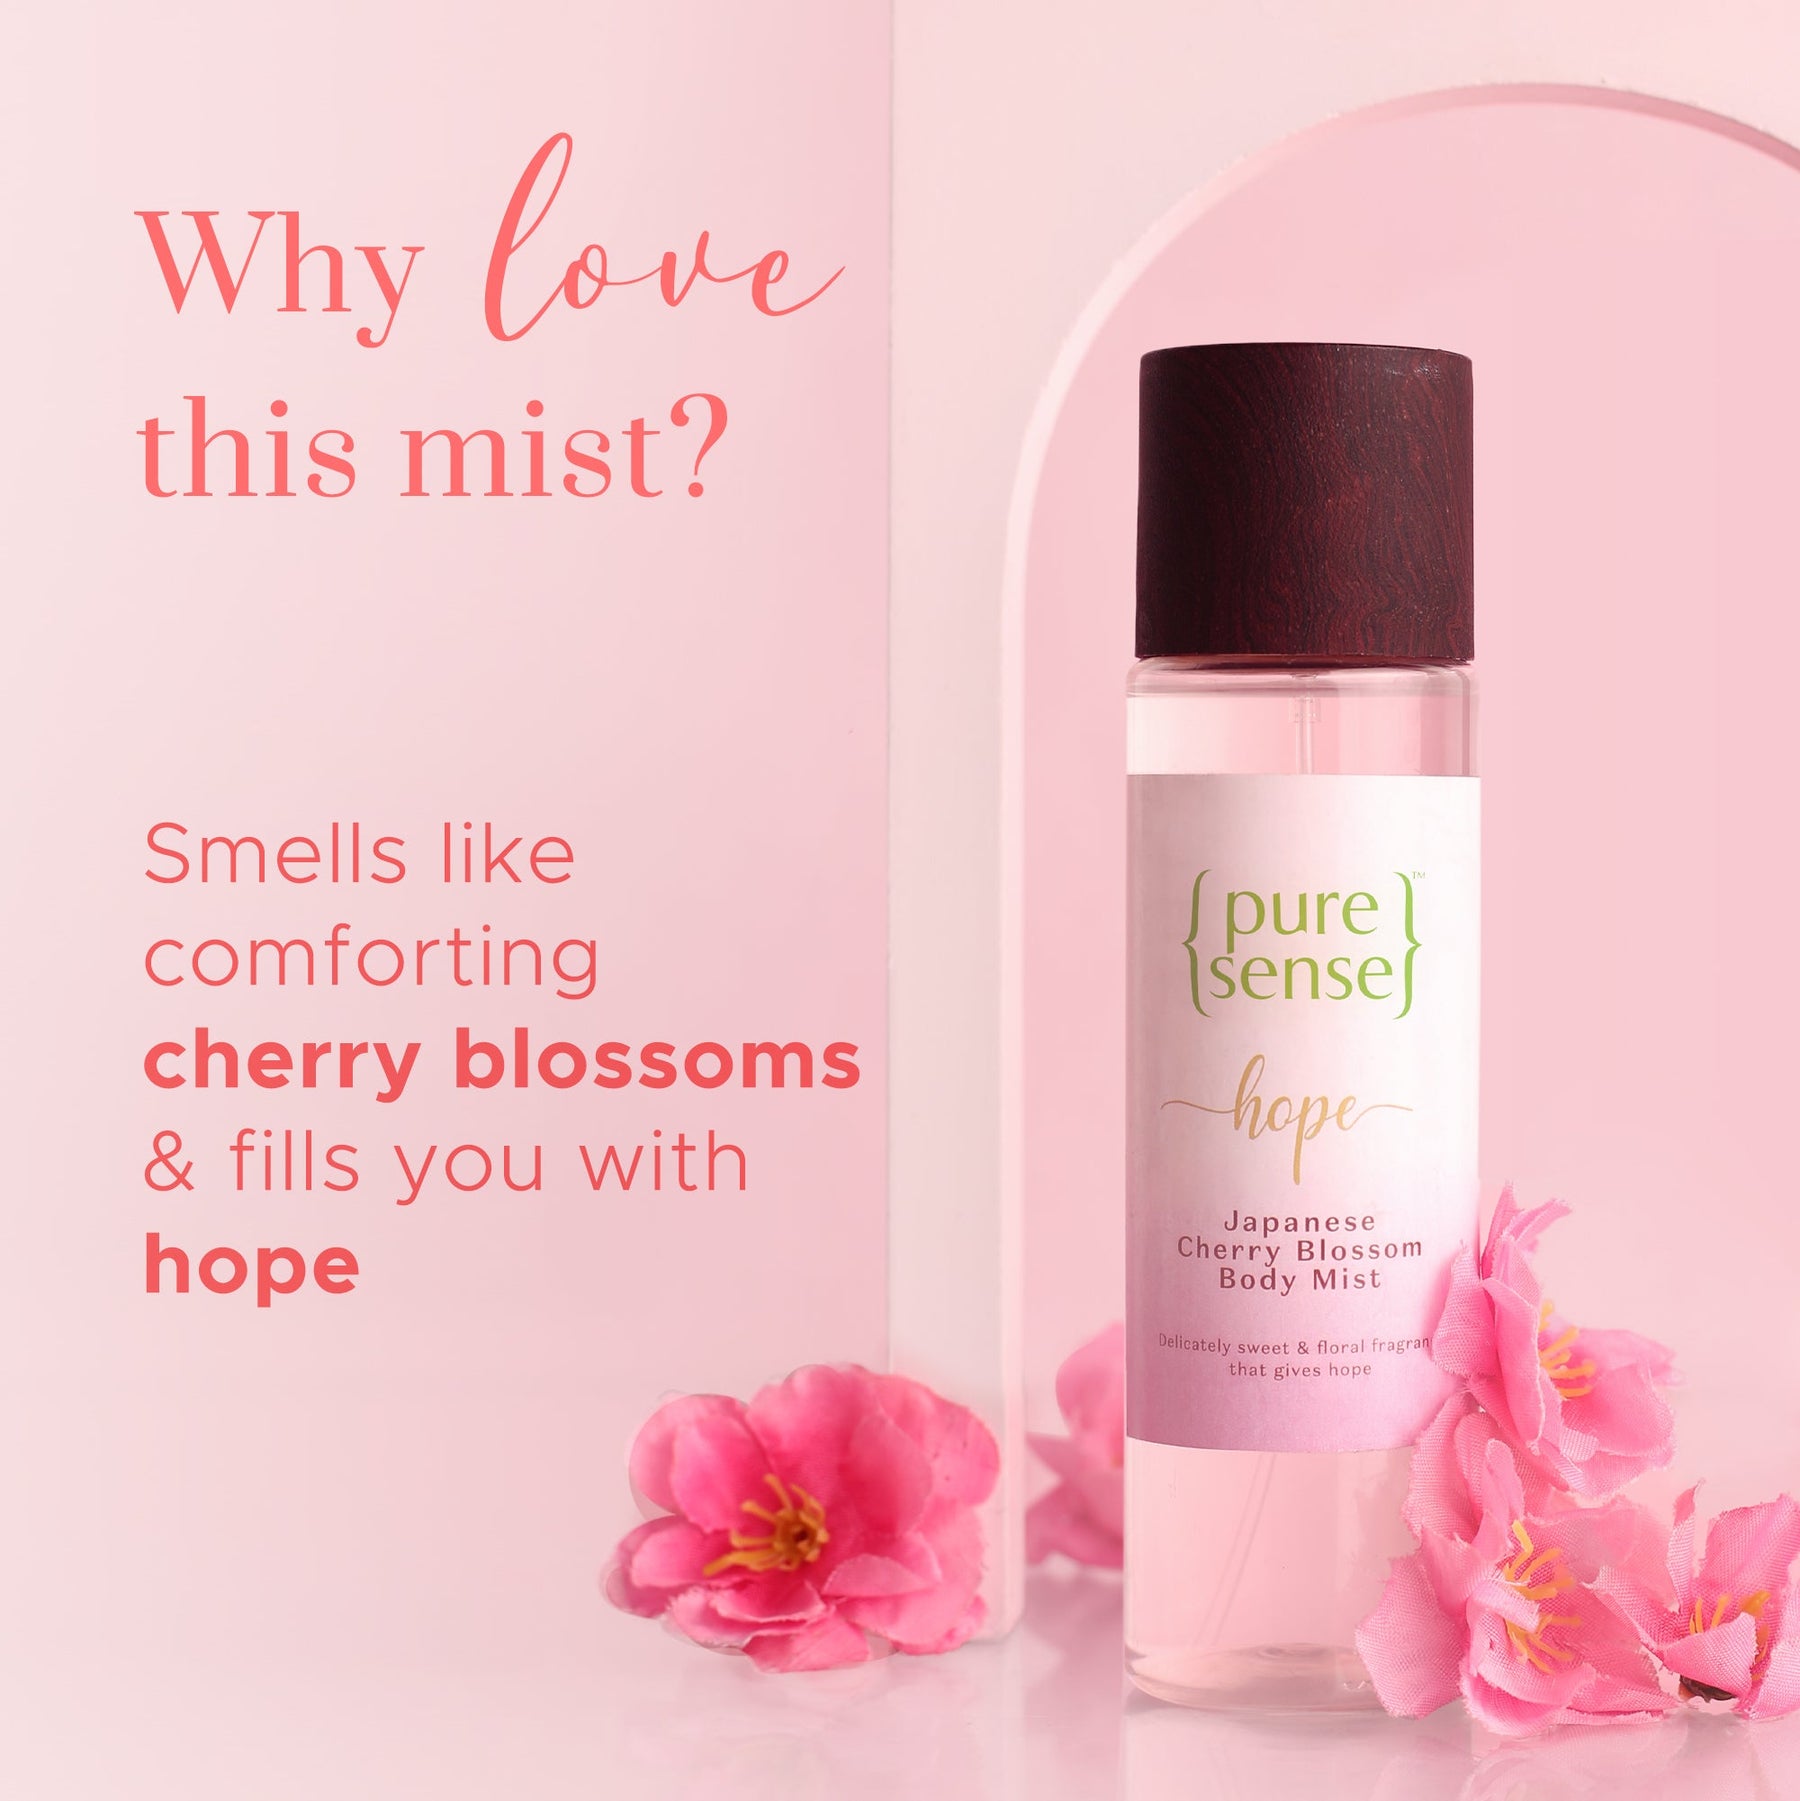 Hope Japanese Cherry Blossom Body Mist | From the makers of Parachute Advansed | 150 ml